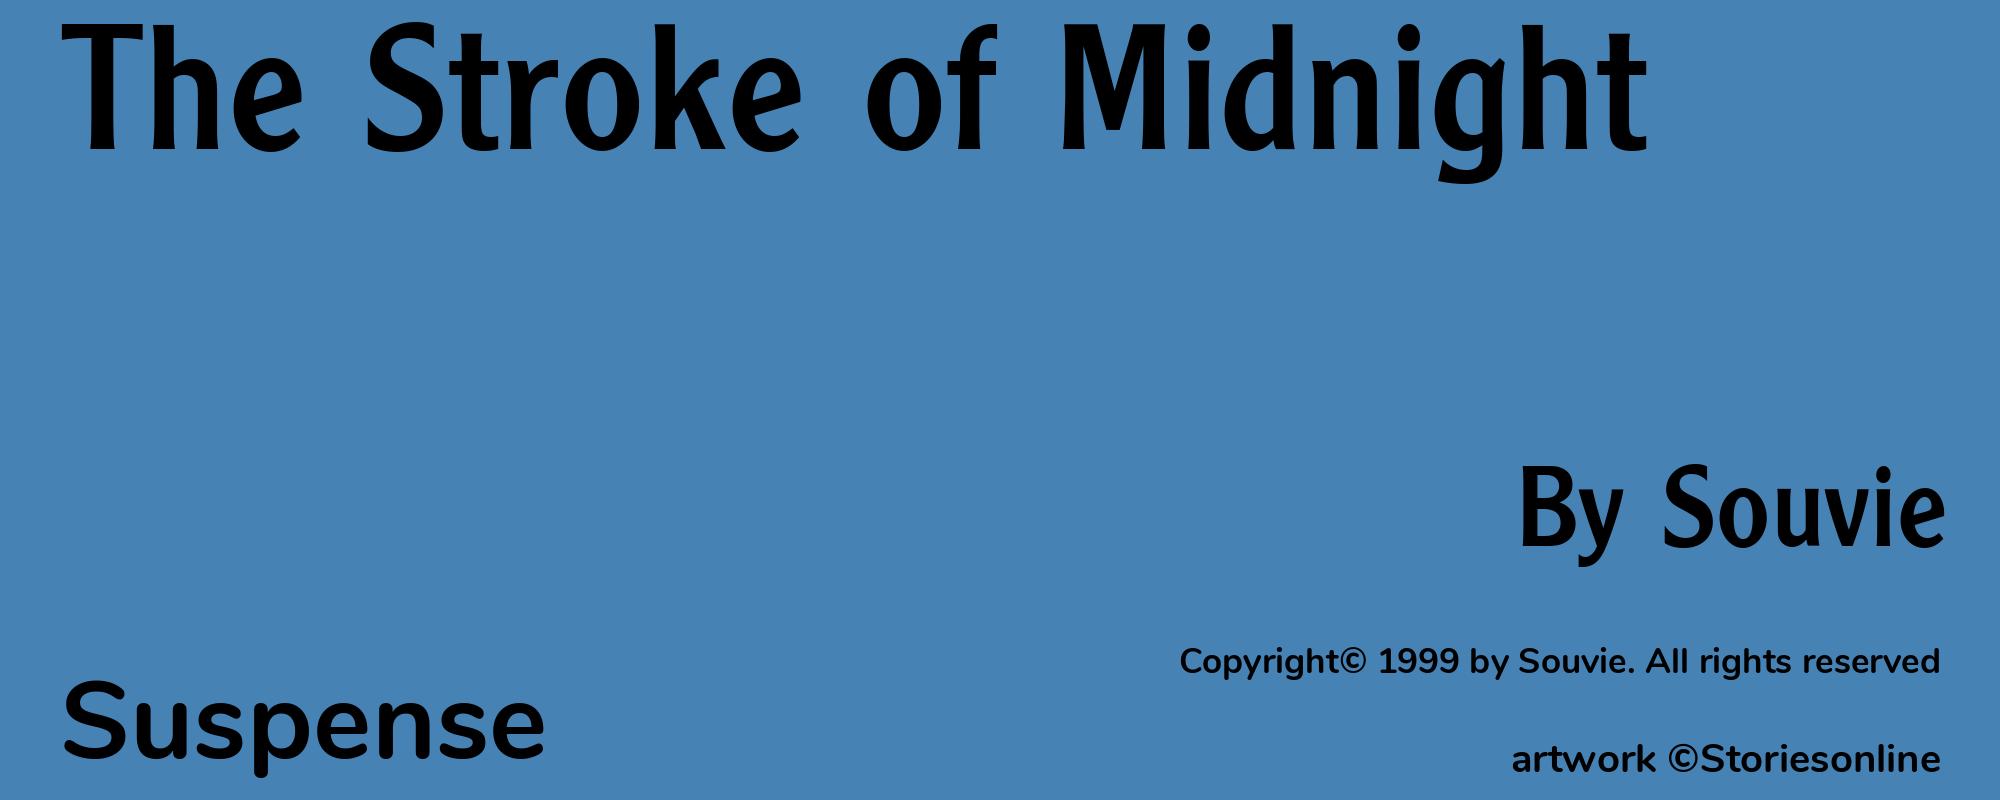 The Stroke of Midnight - Cover